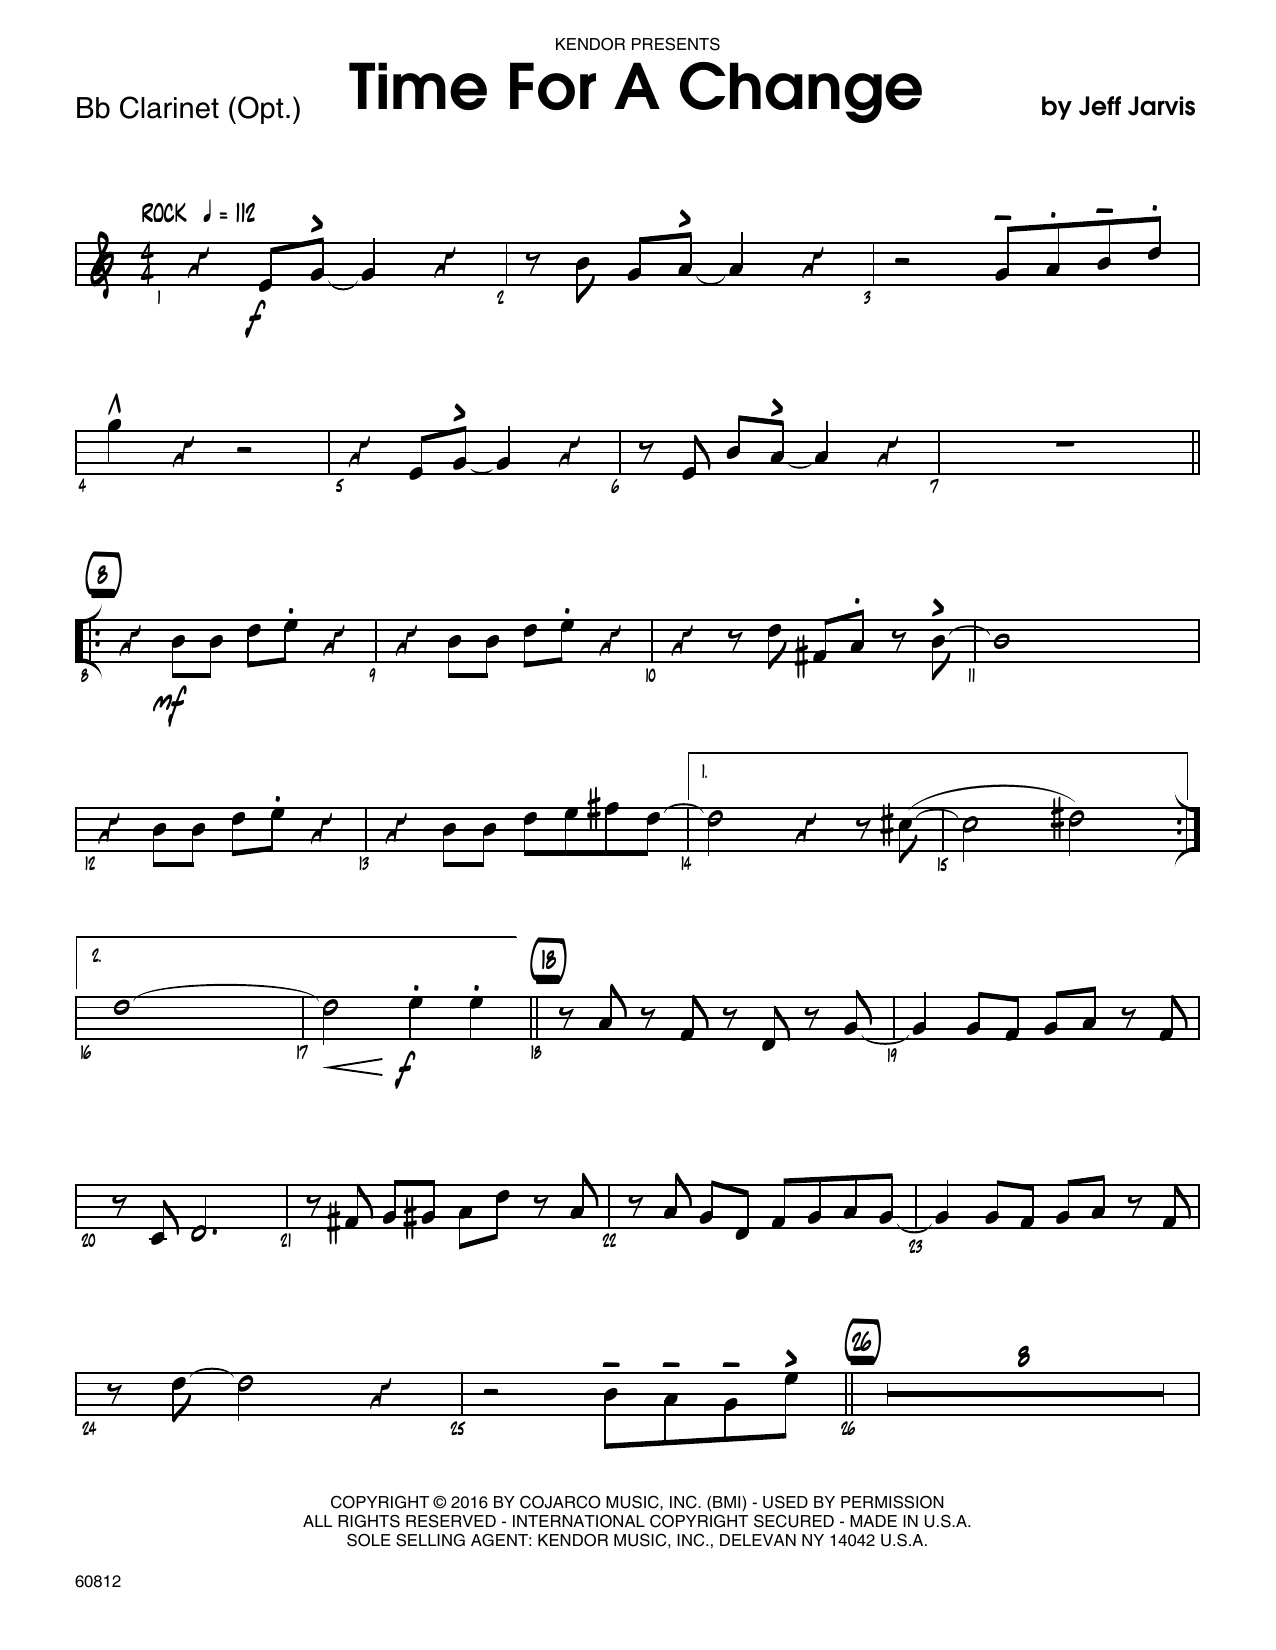 Download Jeff Jarvis Time For A Change - Bb Clarinet Sheet Music